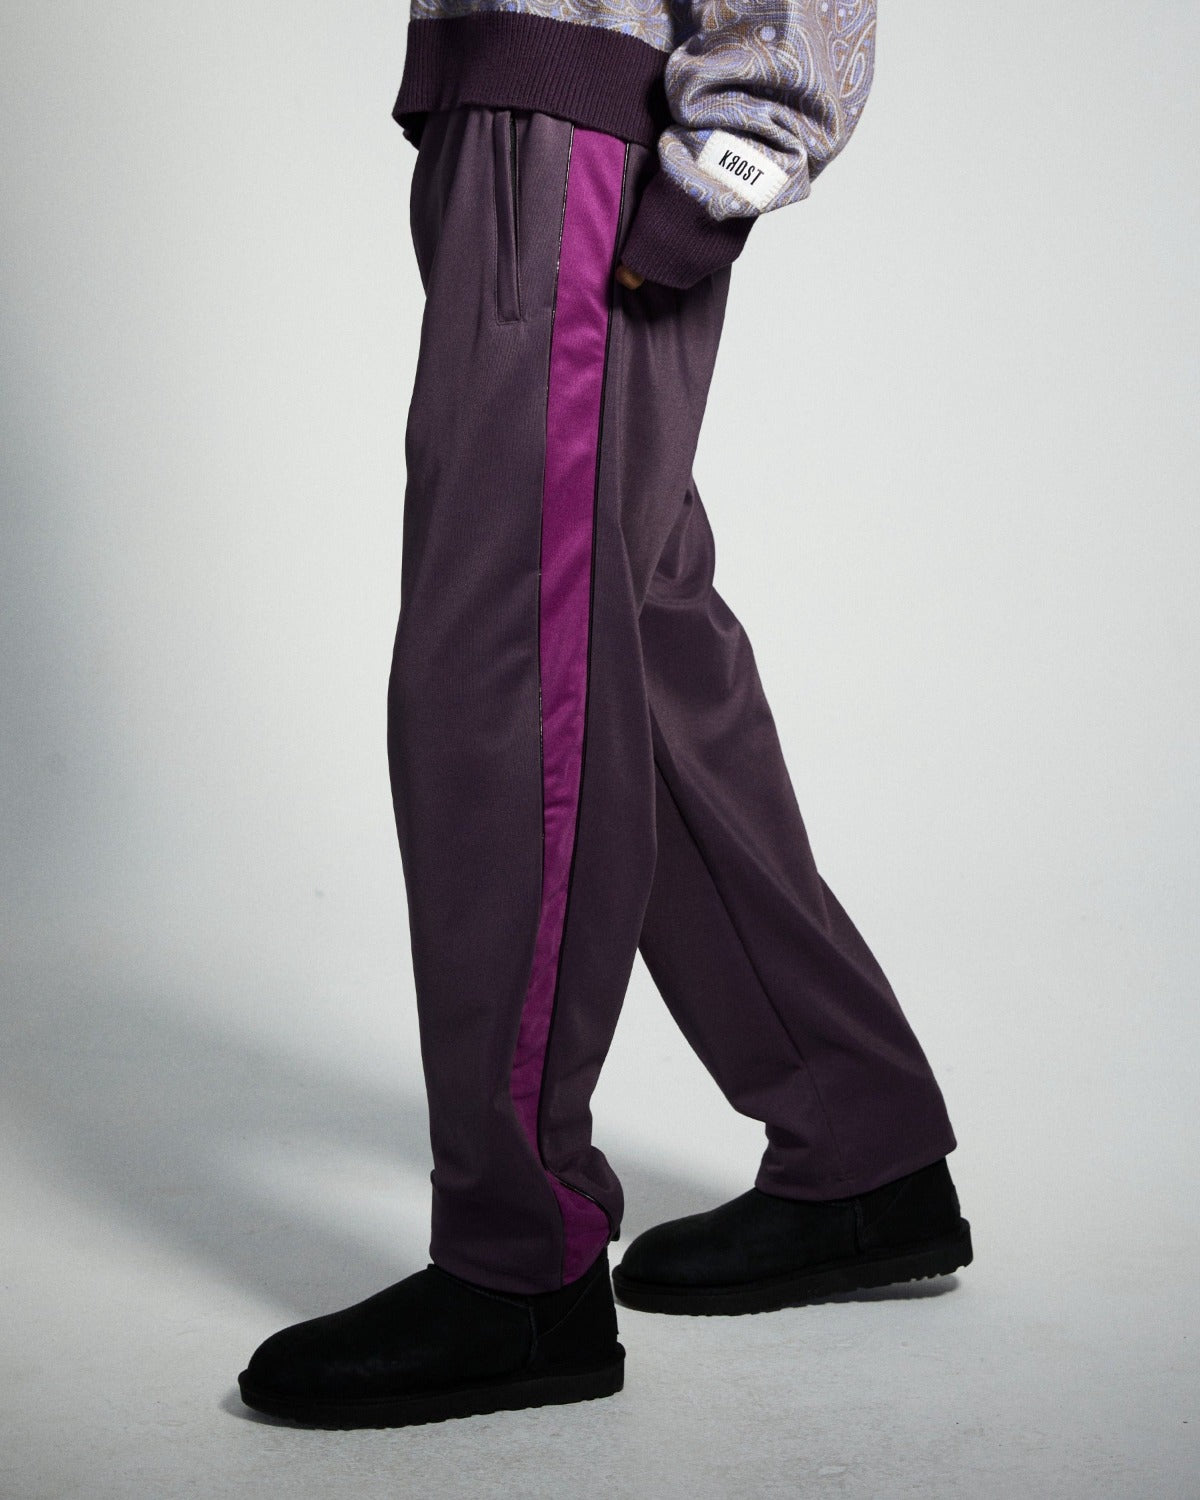 Purple Pants: A Pop of Color for Your Wardrobe